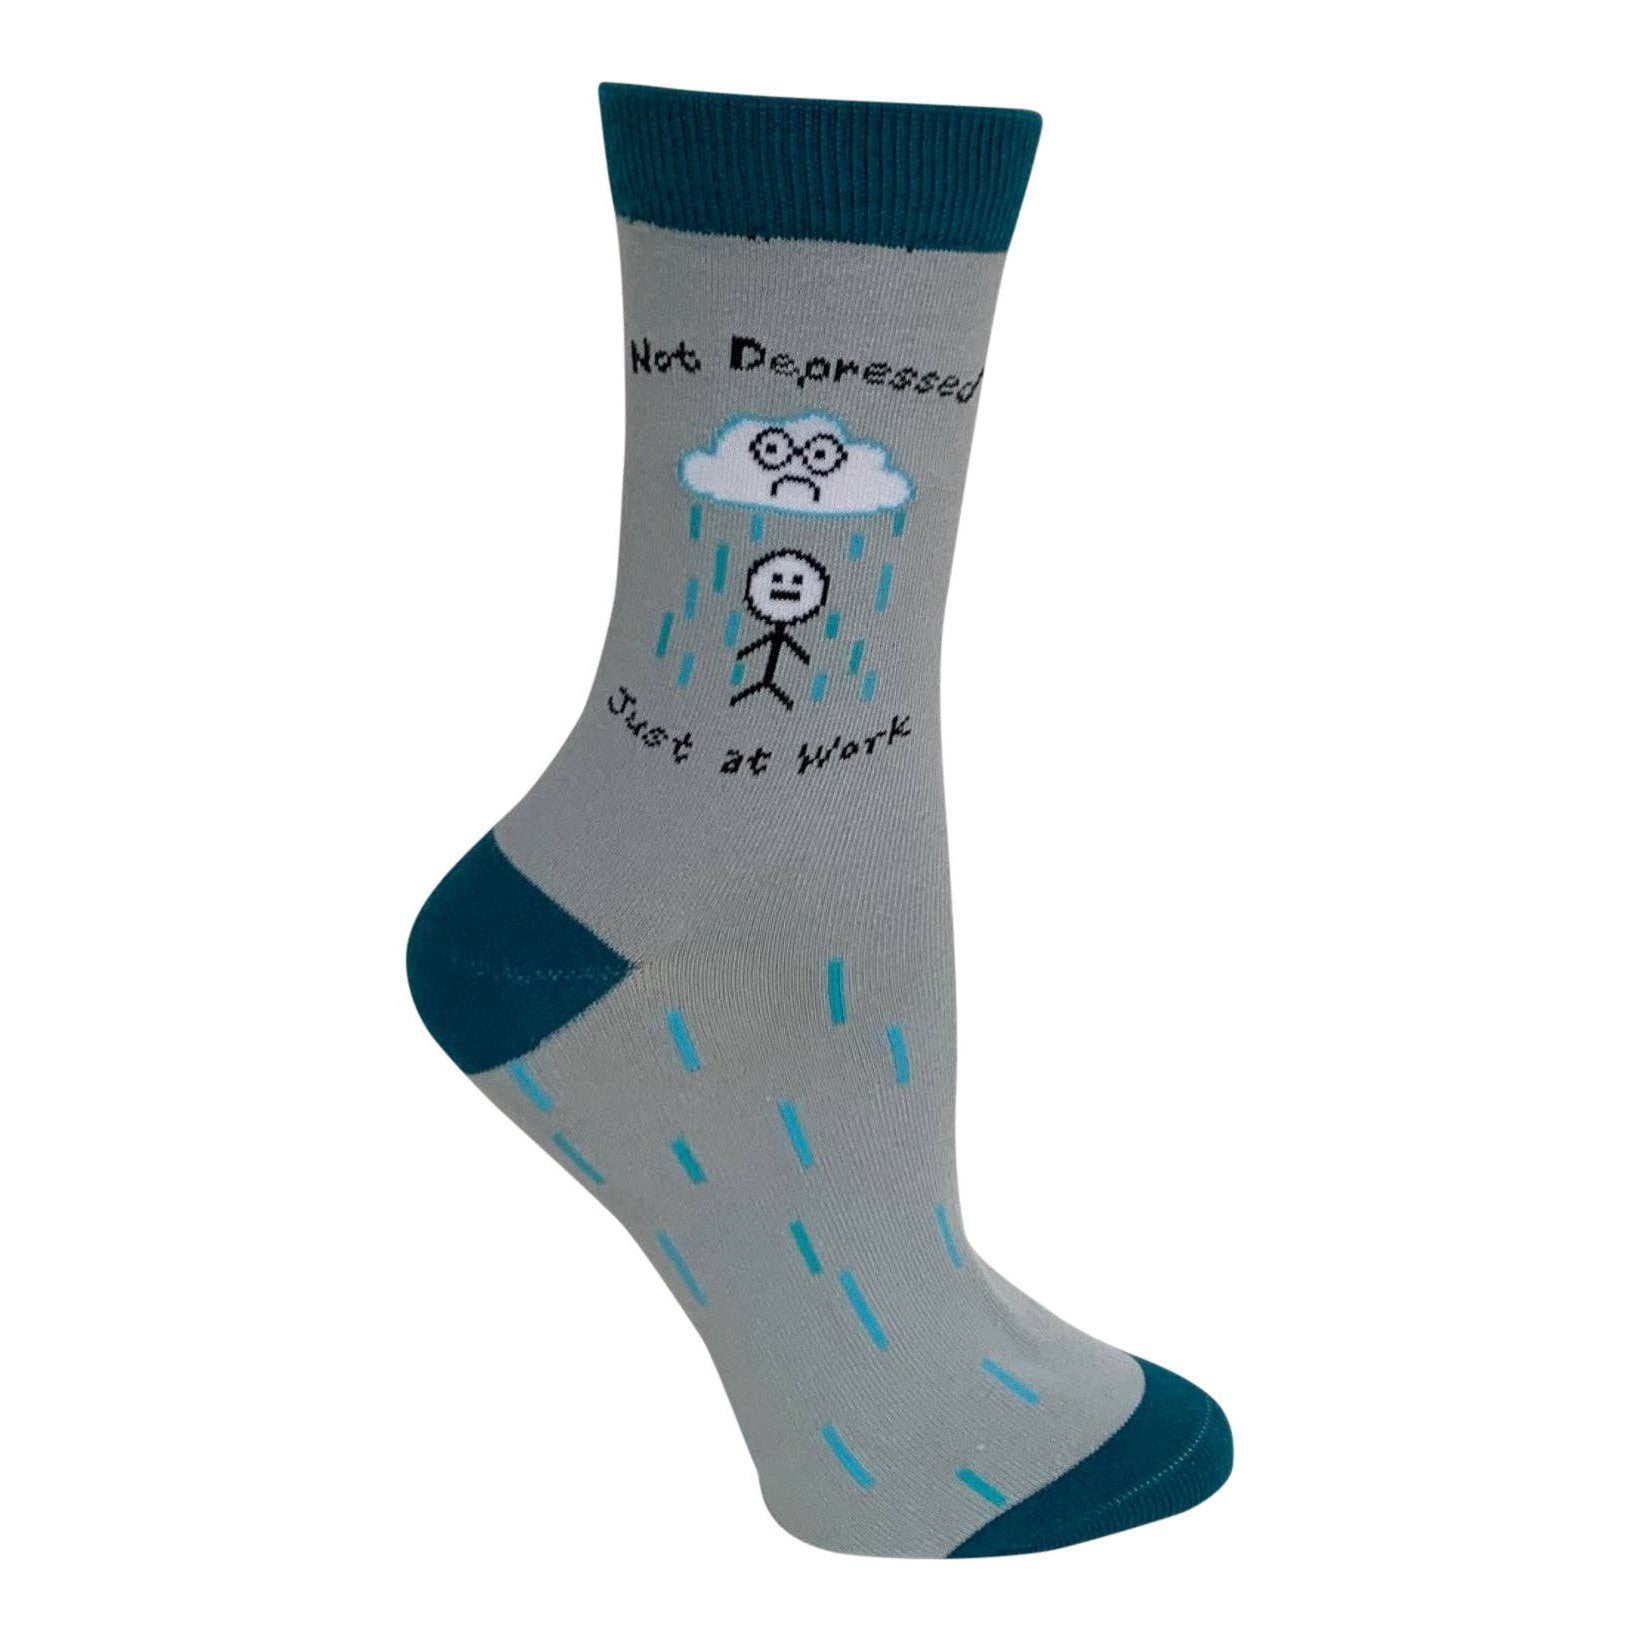 Not Depressed, Just at Work Women's Crew Socks | Gray and Blue Hues